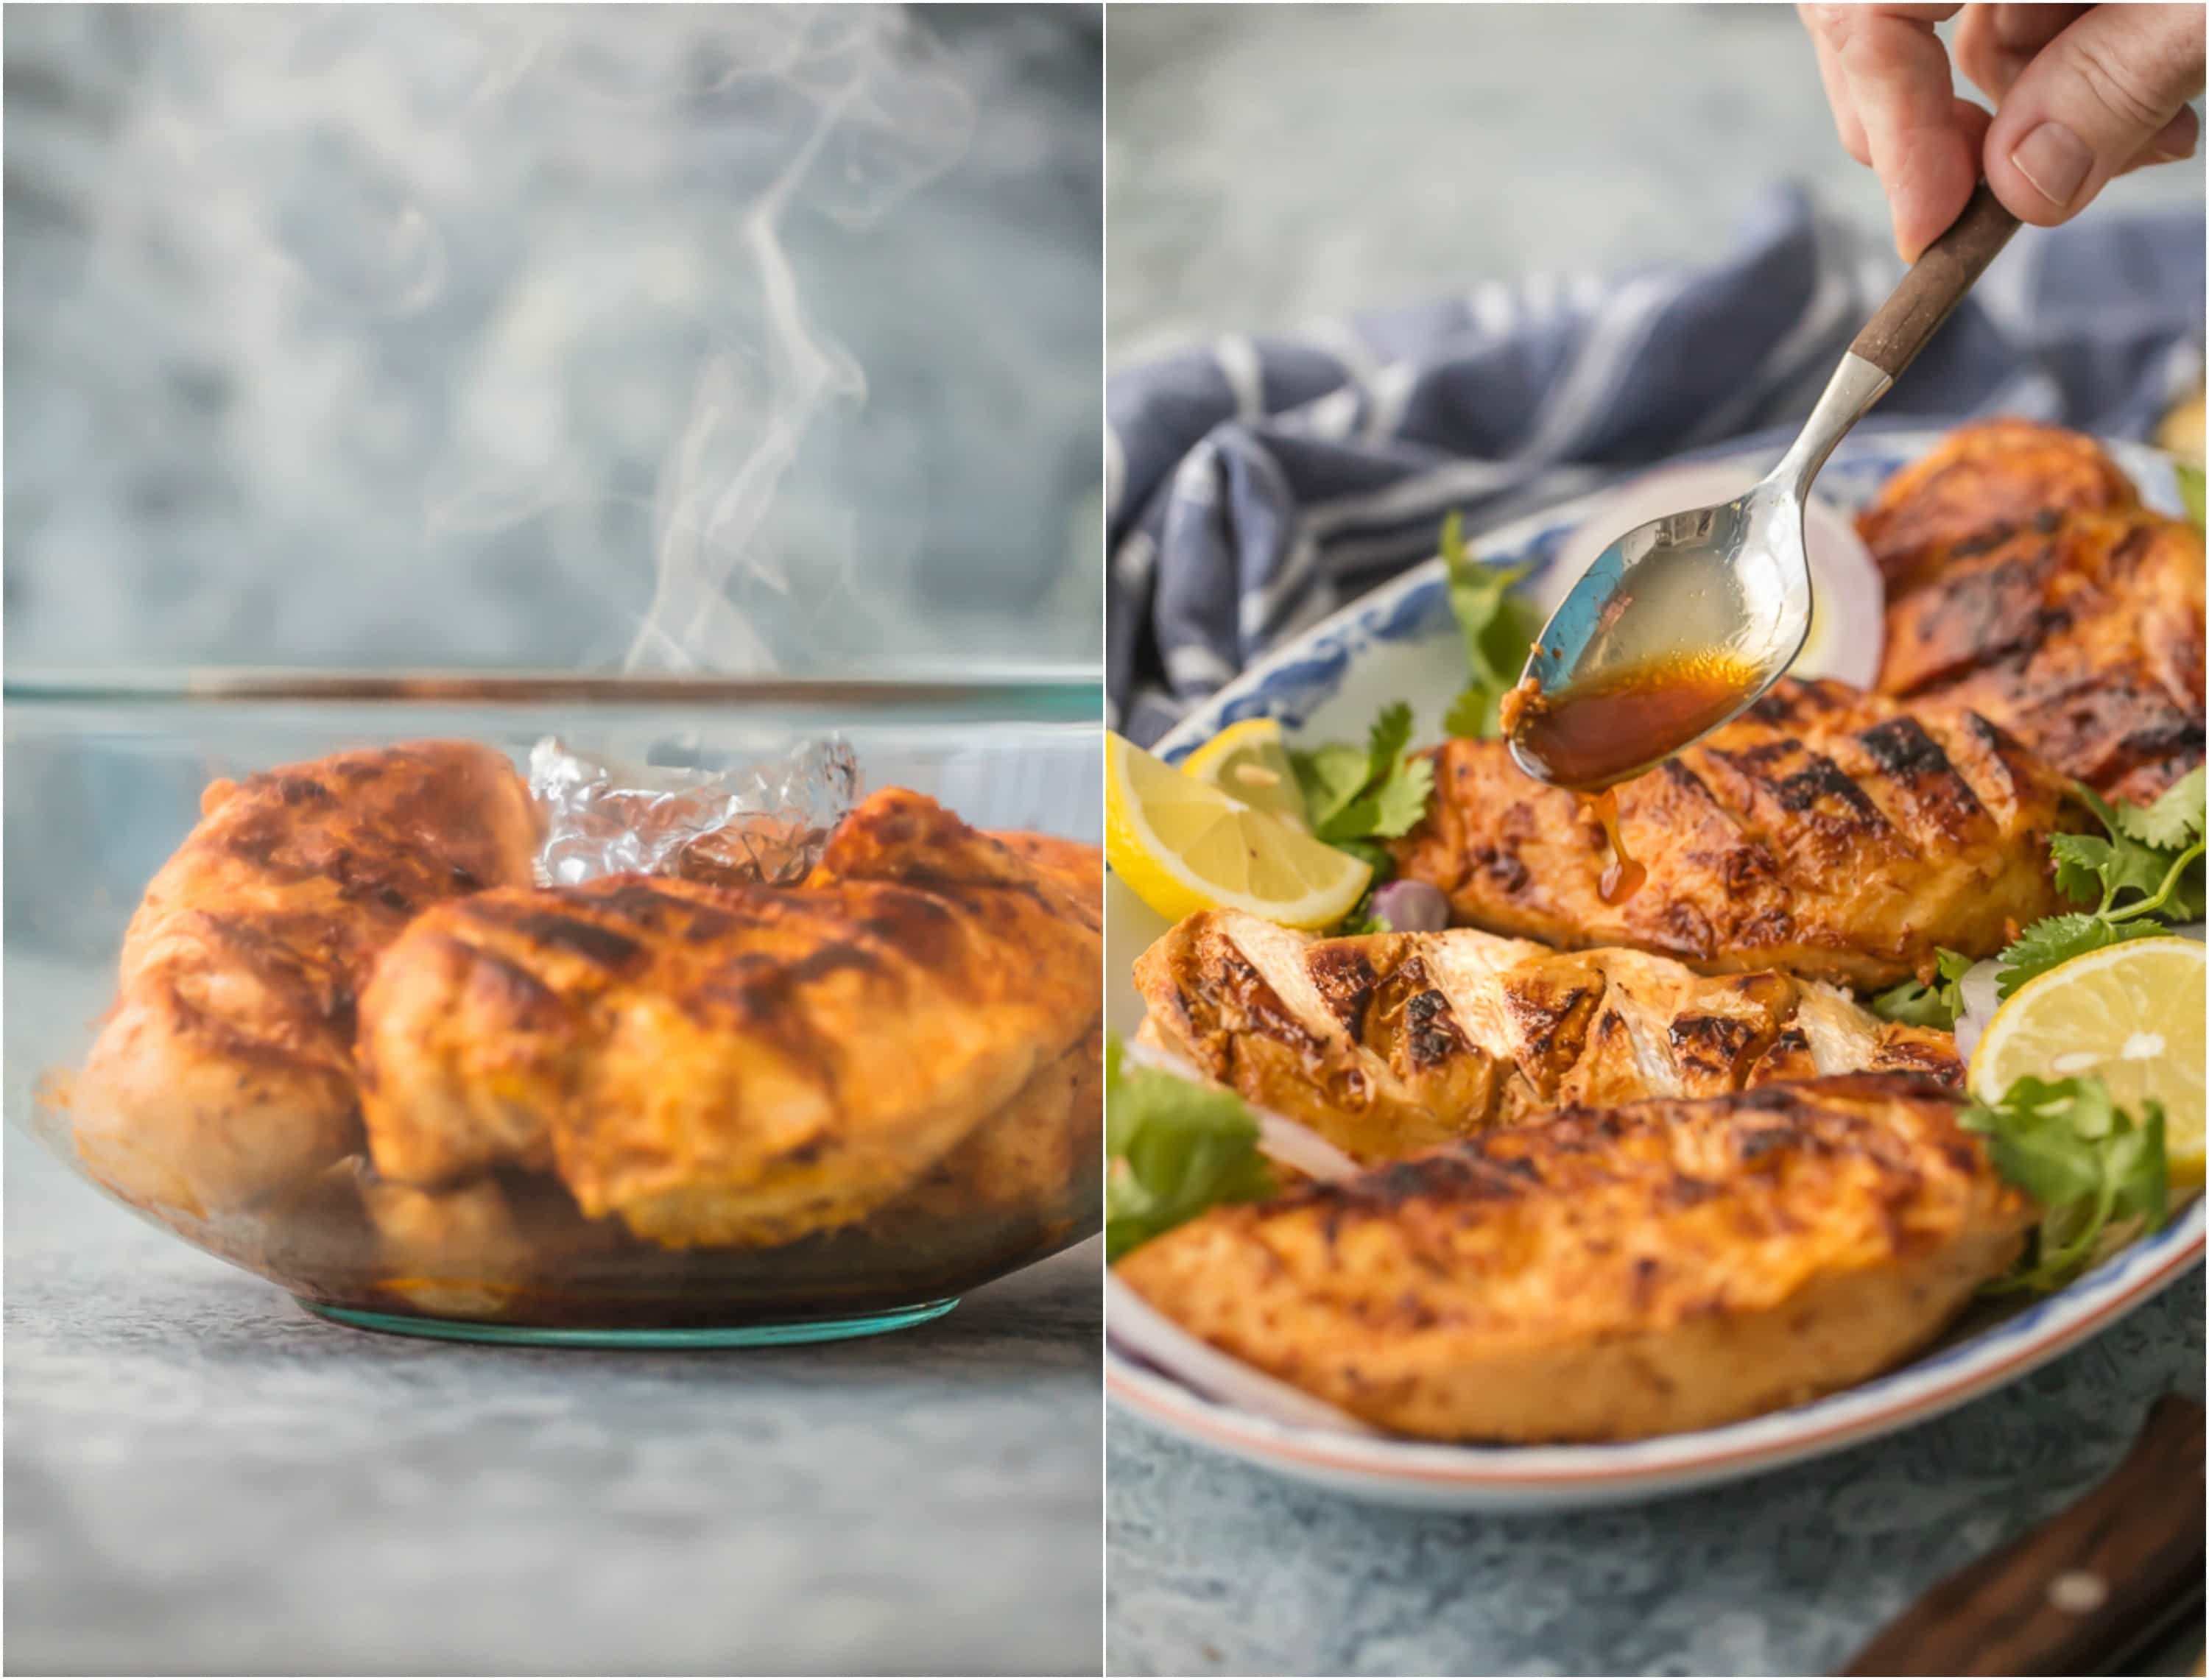 This "SMOKED" SKILLET TANDOORI CHICKEN is loaded with so much flavor you'll swear you used a smoker. Such a fun hack for a delicious and unique dinner at home.